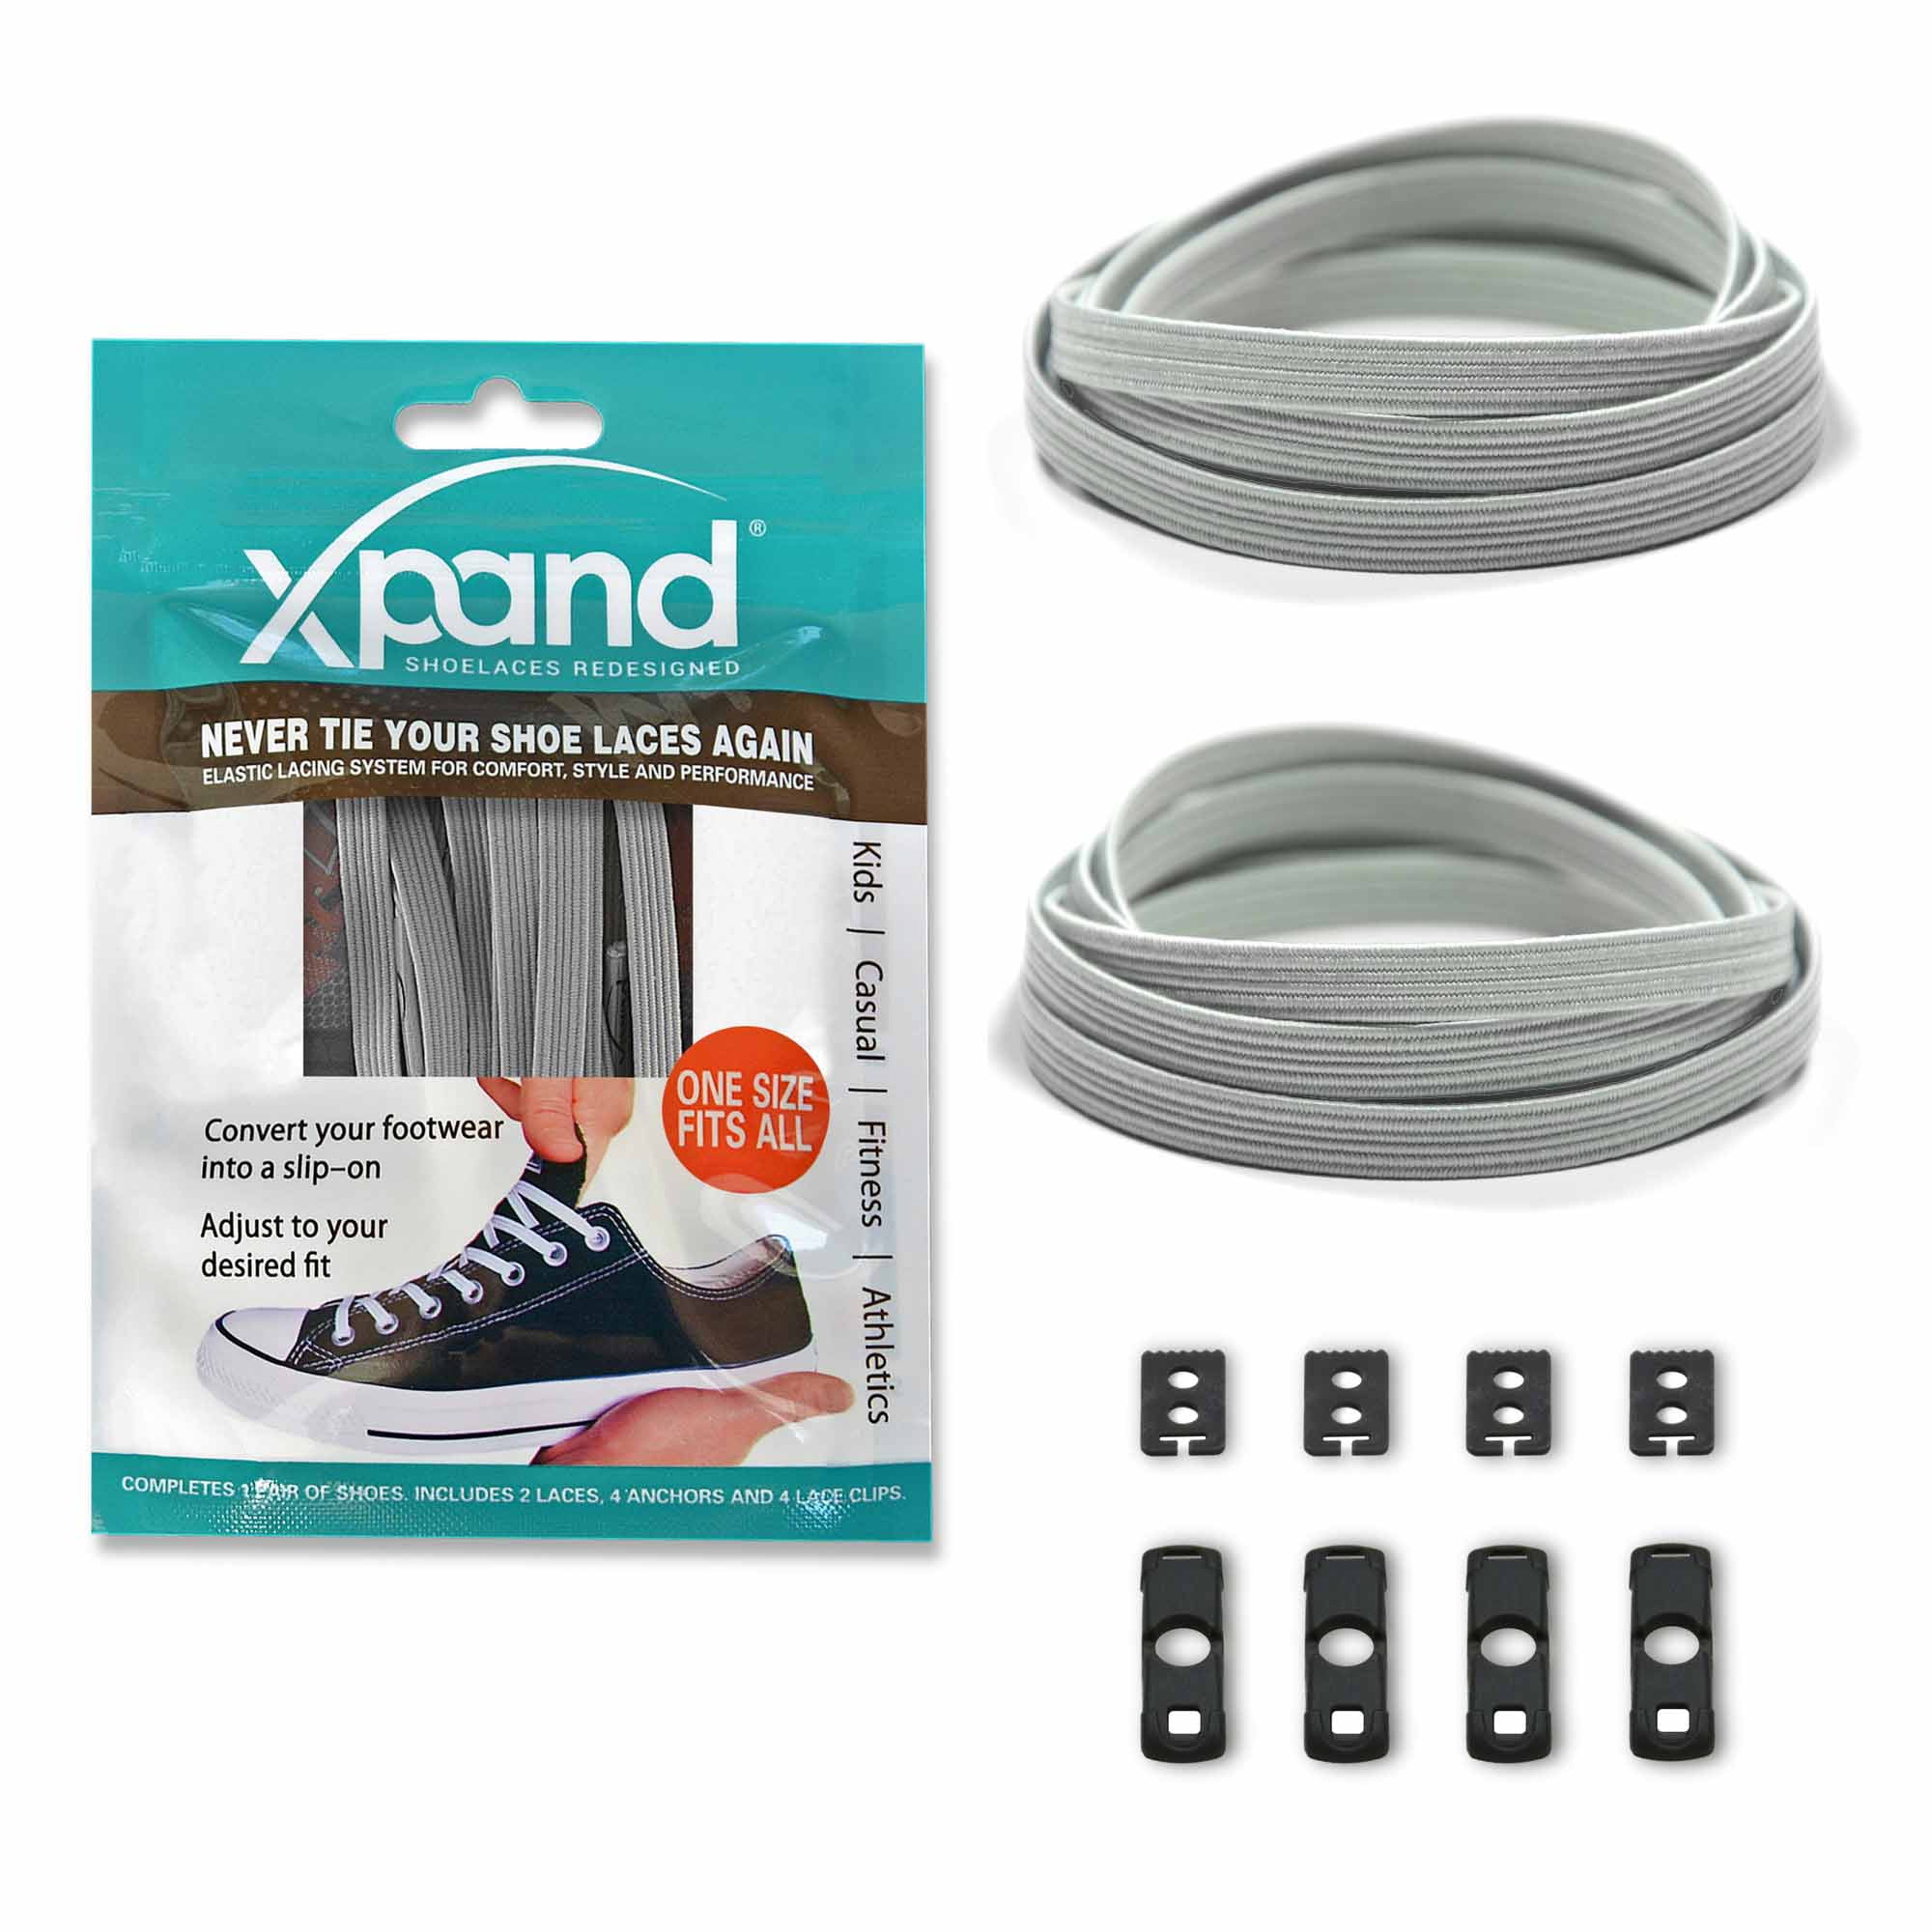 Xpand No Tie Shoelaces System Elastic Laces One Size Fits All Adult Kids Shoes 